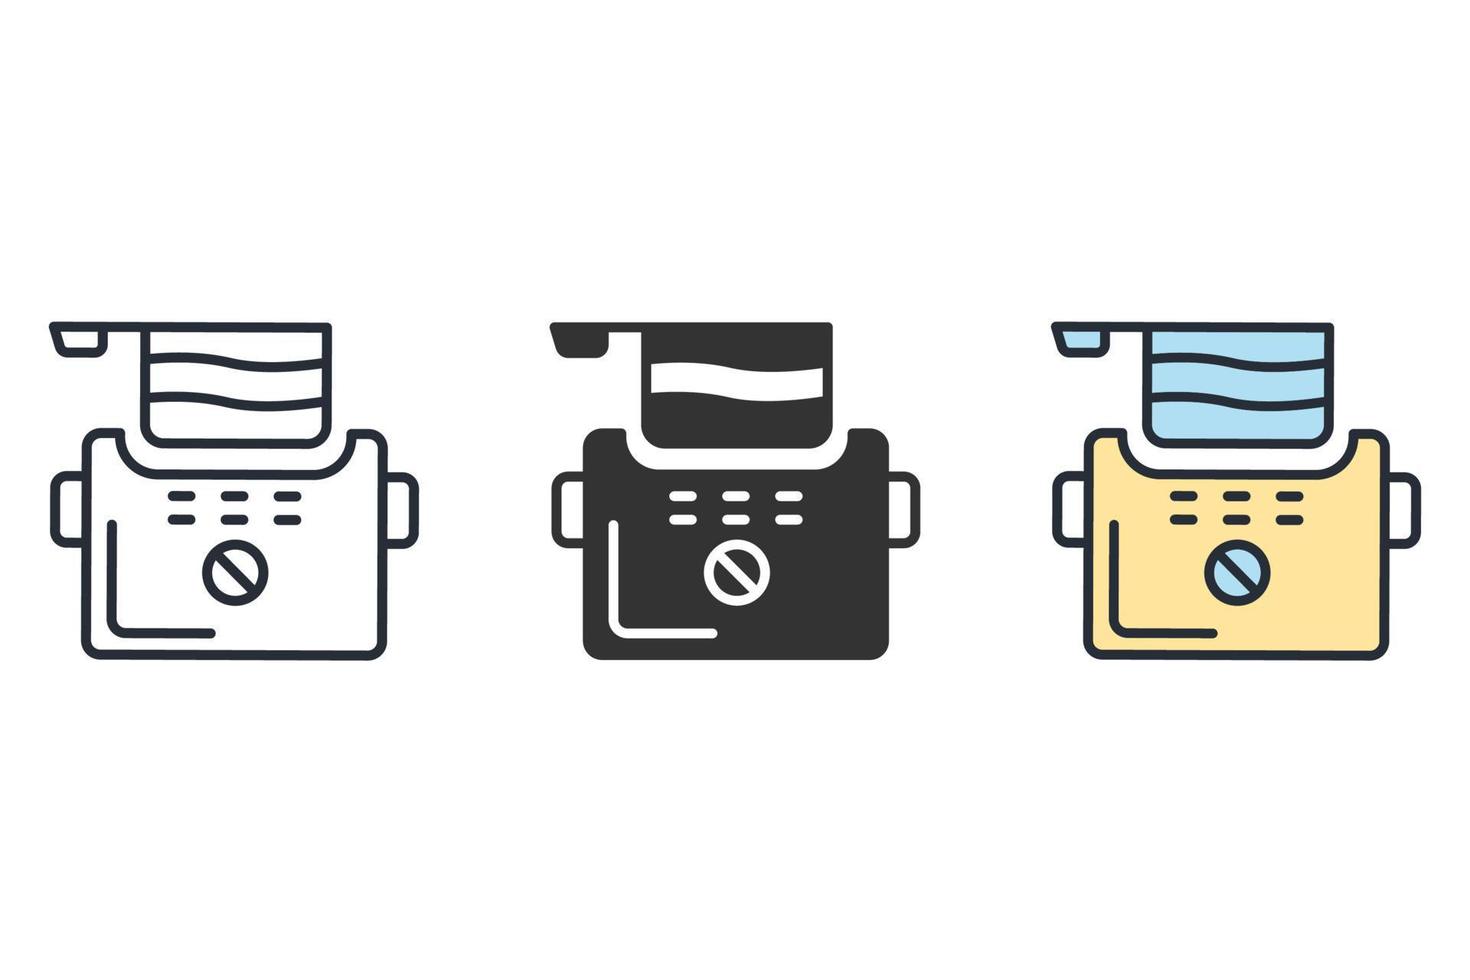 fryer icons  symbol vector elements for infographic web